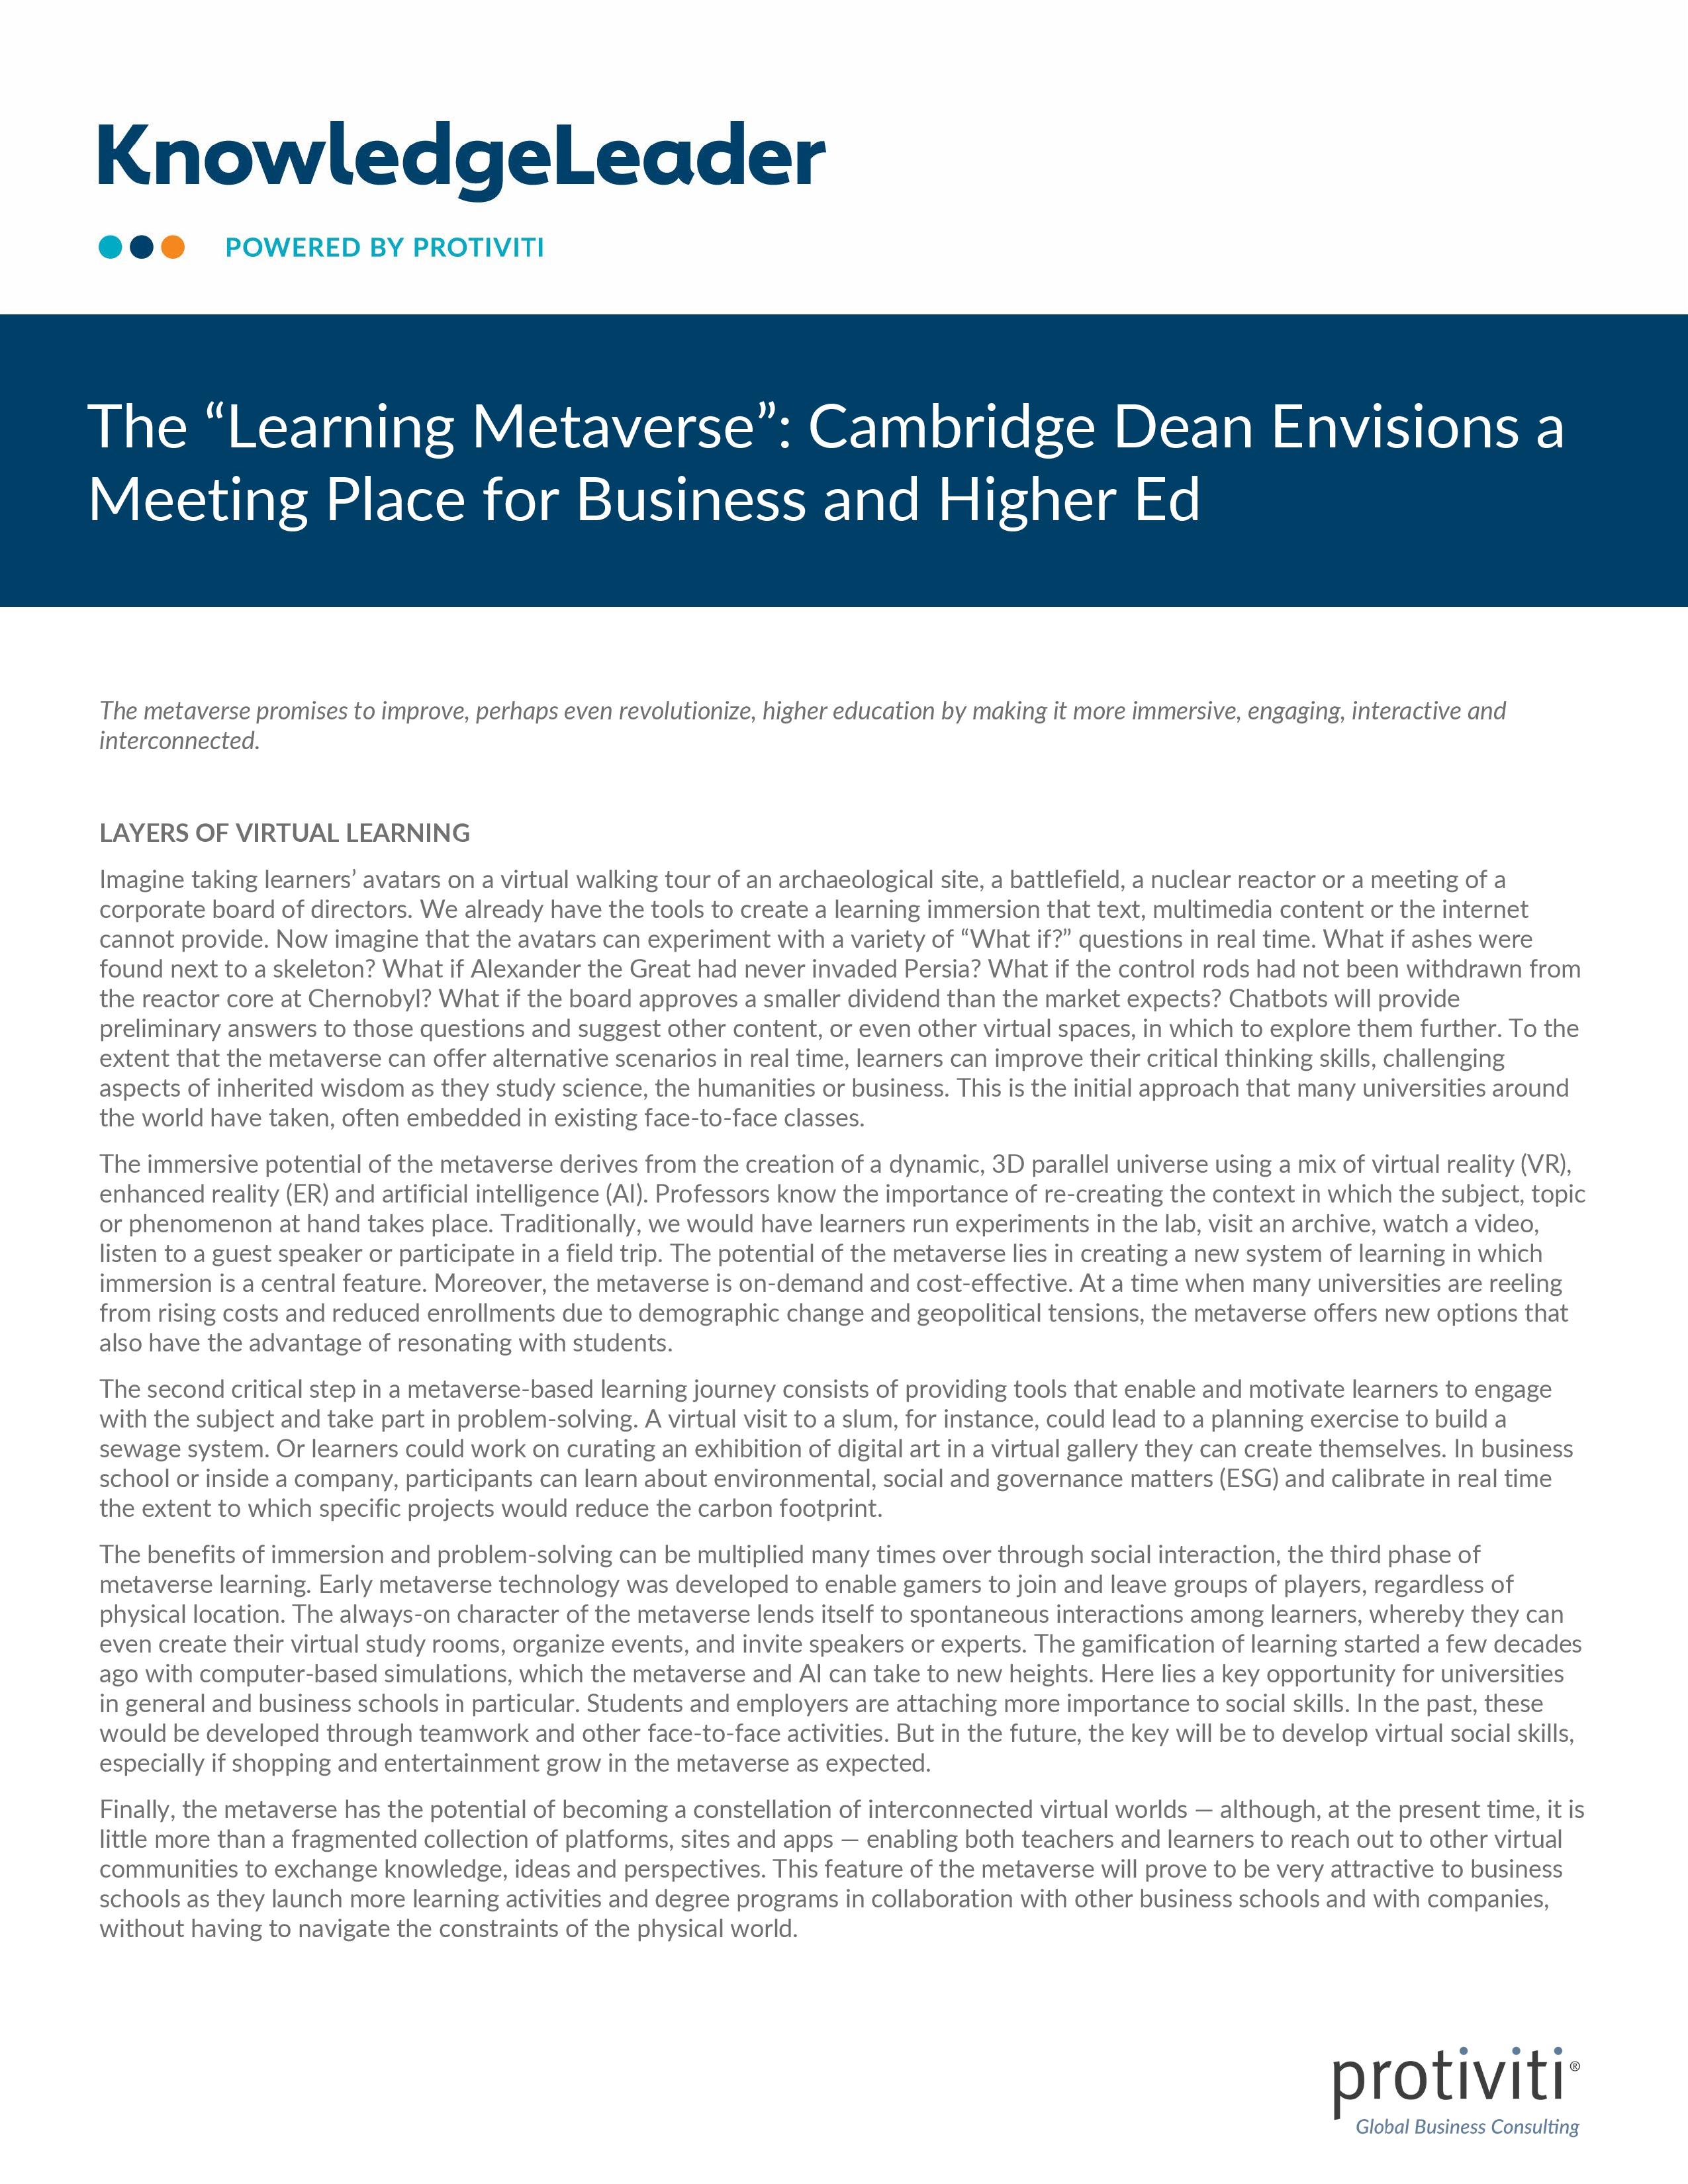 screenshot of the first page of System Pre-Implementation Audit Work Program The “Learning Metaverse” Cambridge Dean Envisions a Meeting Place for Business and Higher Ed